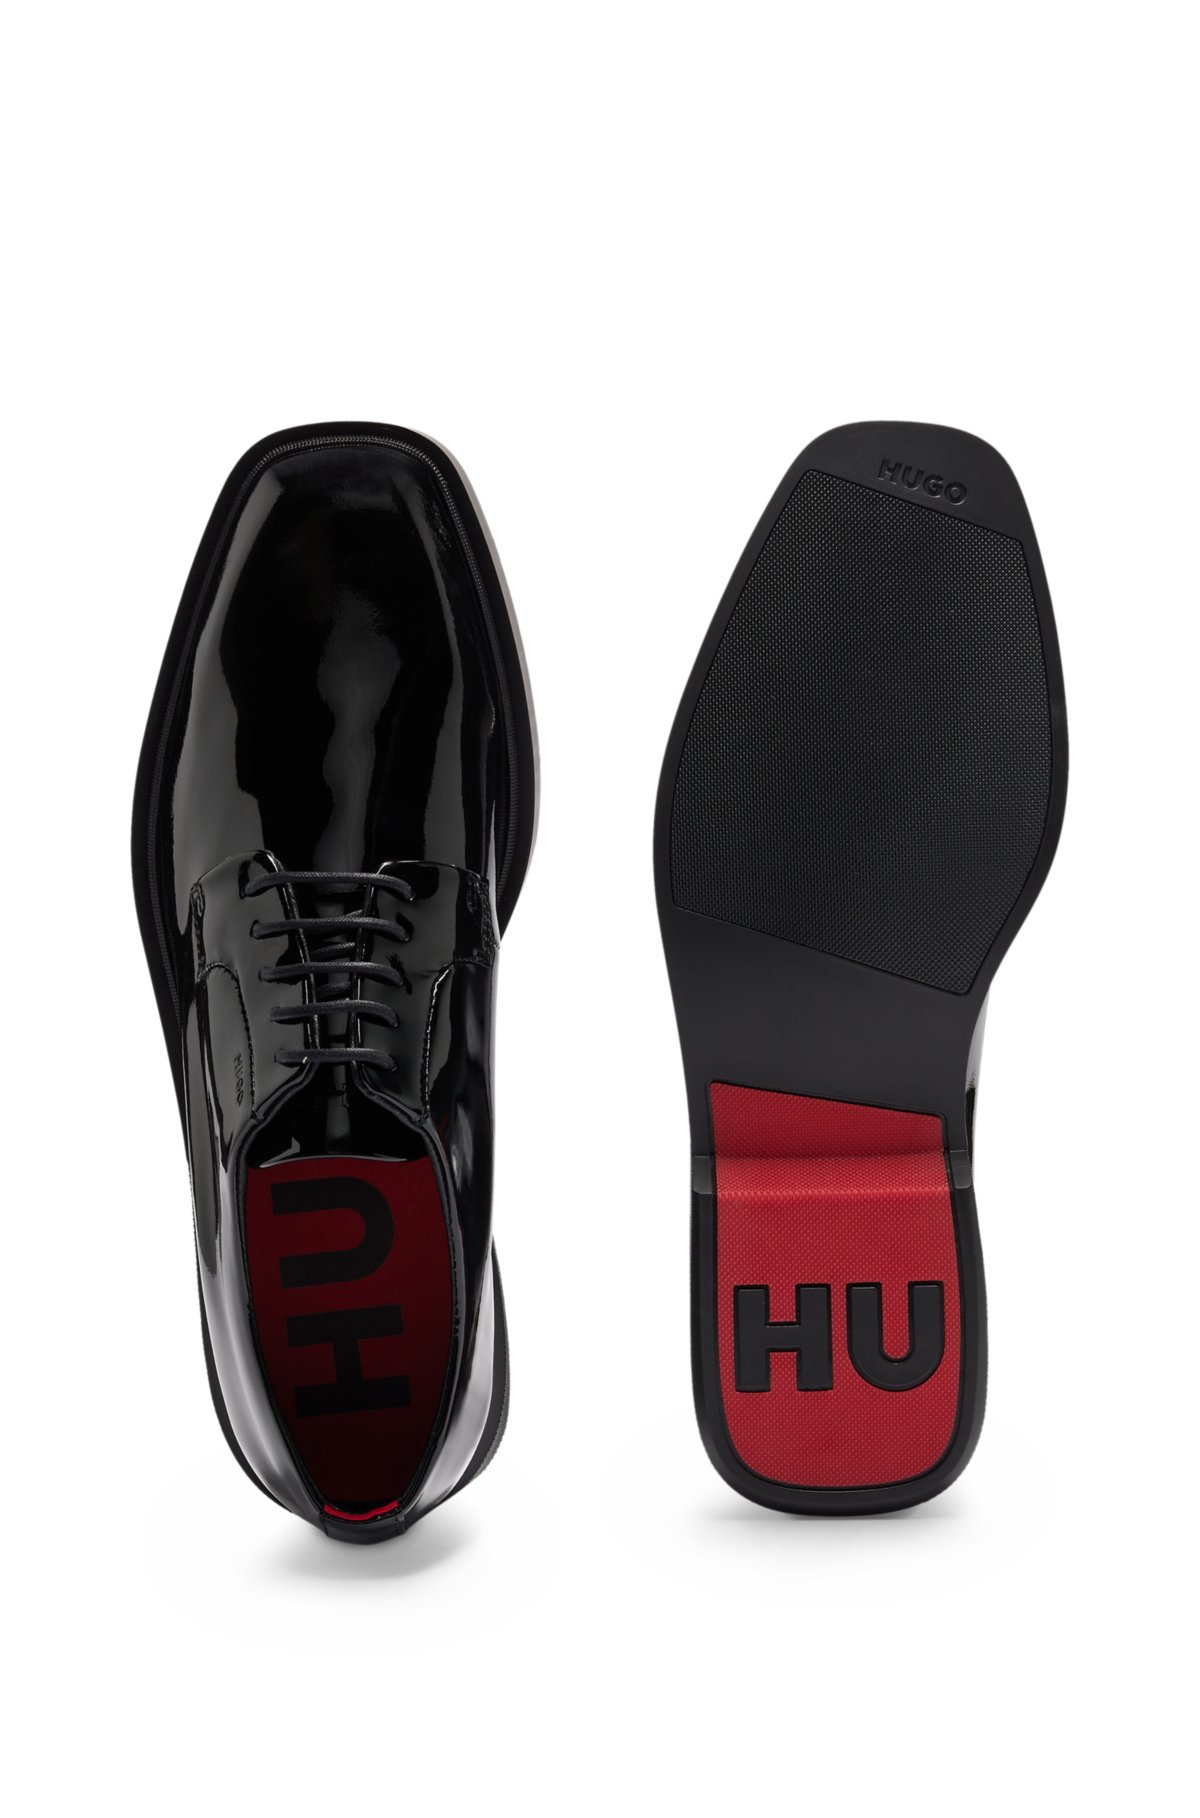 Patent-leather loop HUGO shoes Derby - with pull signature